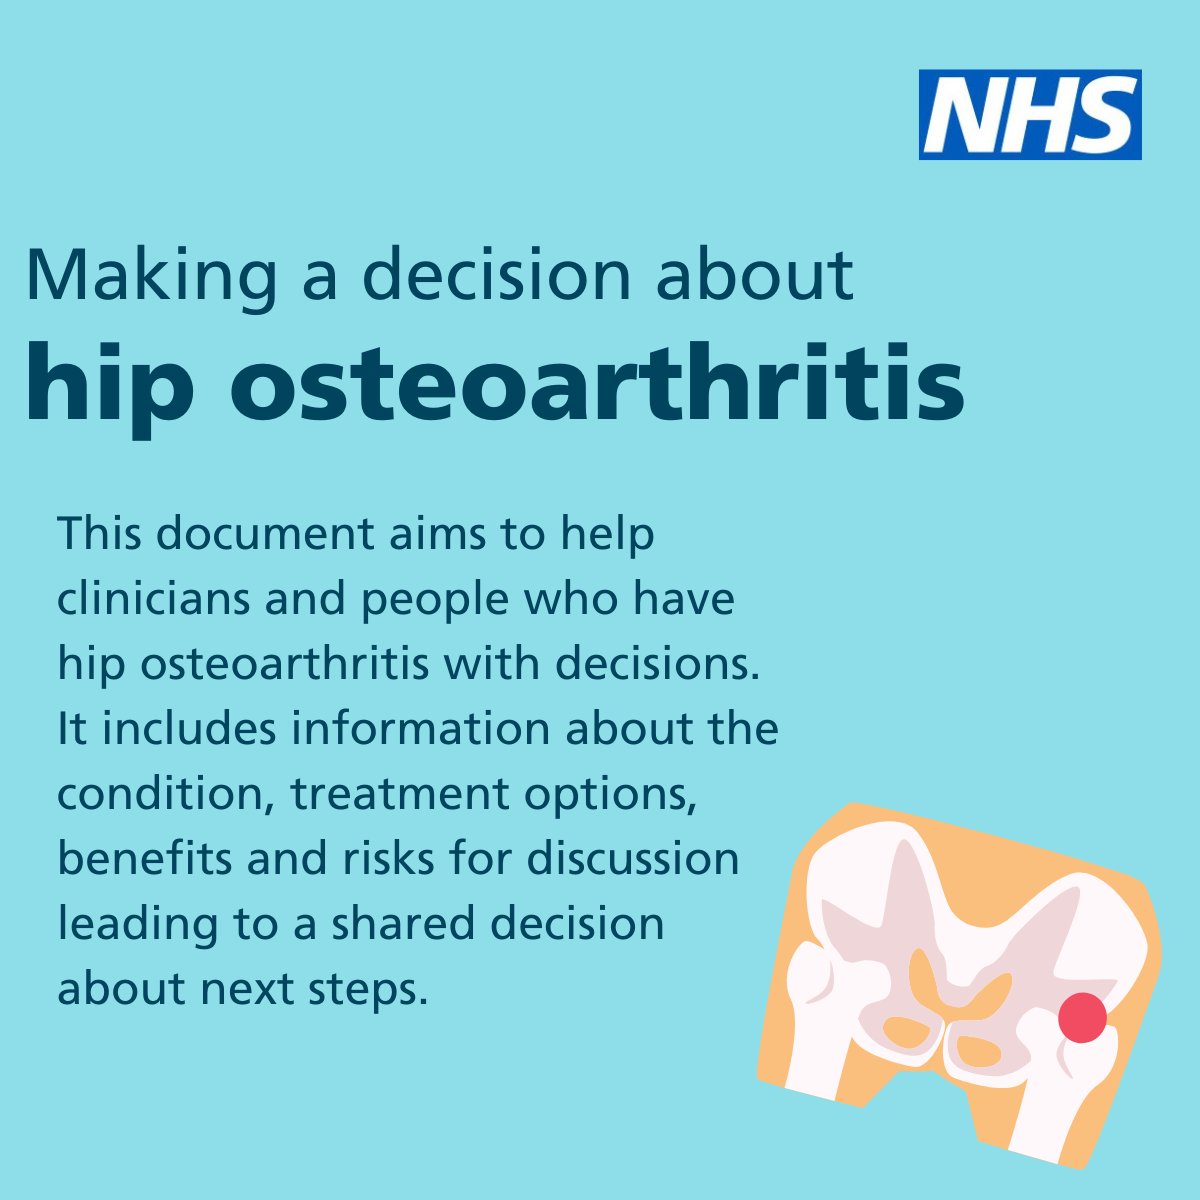 The hip osteoarthritis decision support tool helps with #SharedDecisionMaking conversations between clinician and patient by explaining treatment, care and support options to help the patient consider what matters most to them.

england.nhs.uk/decision-suppo…

#BestMSKHealth